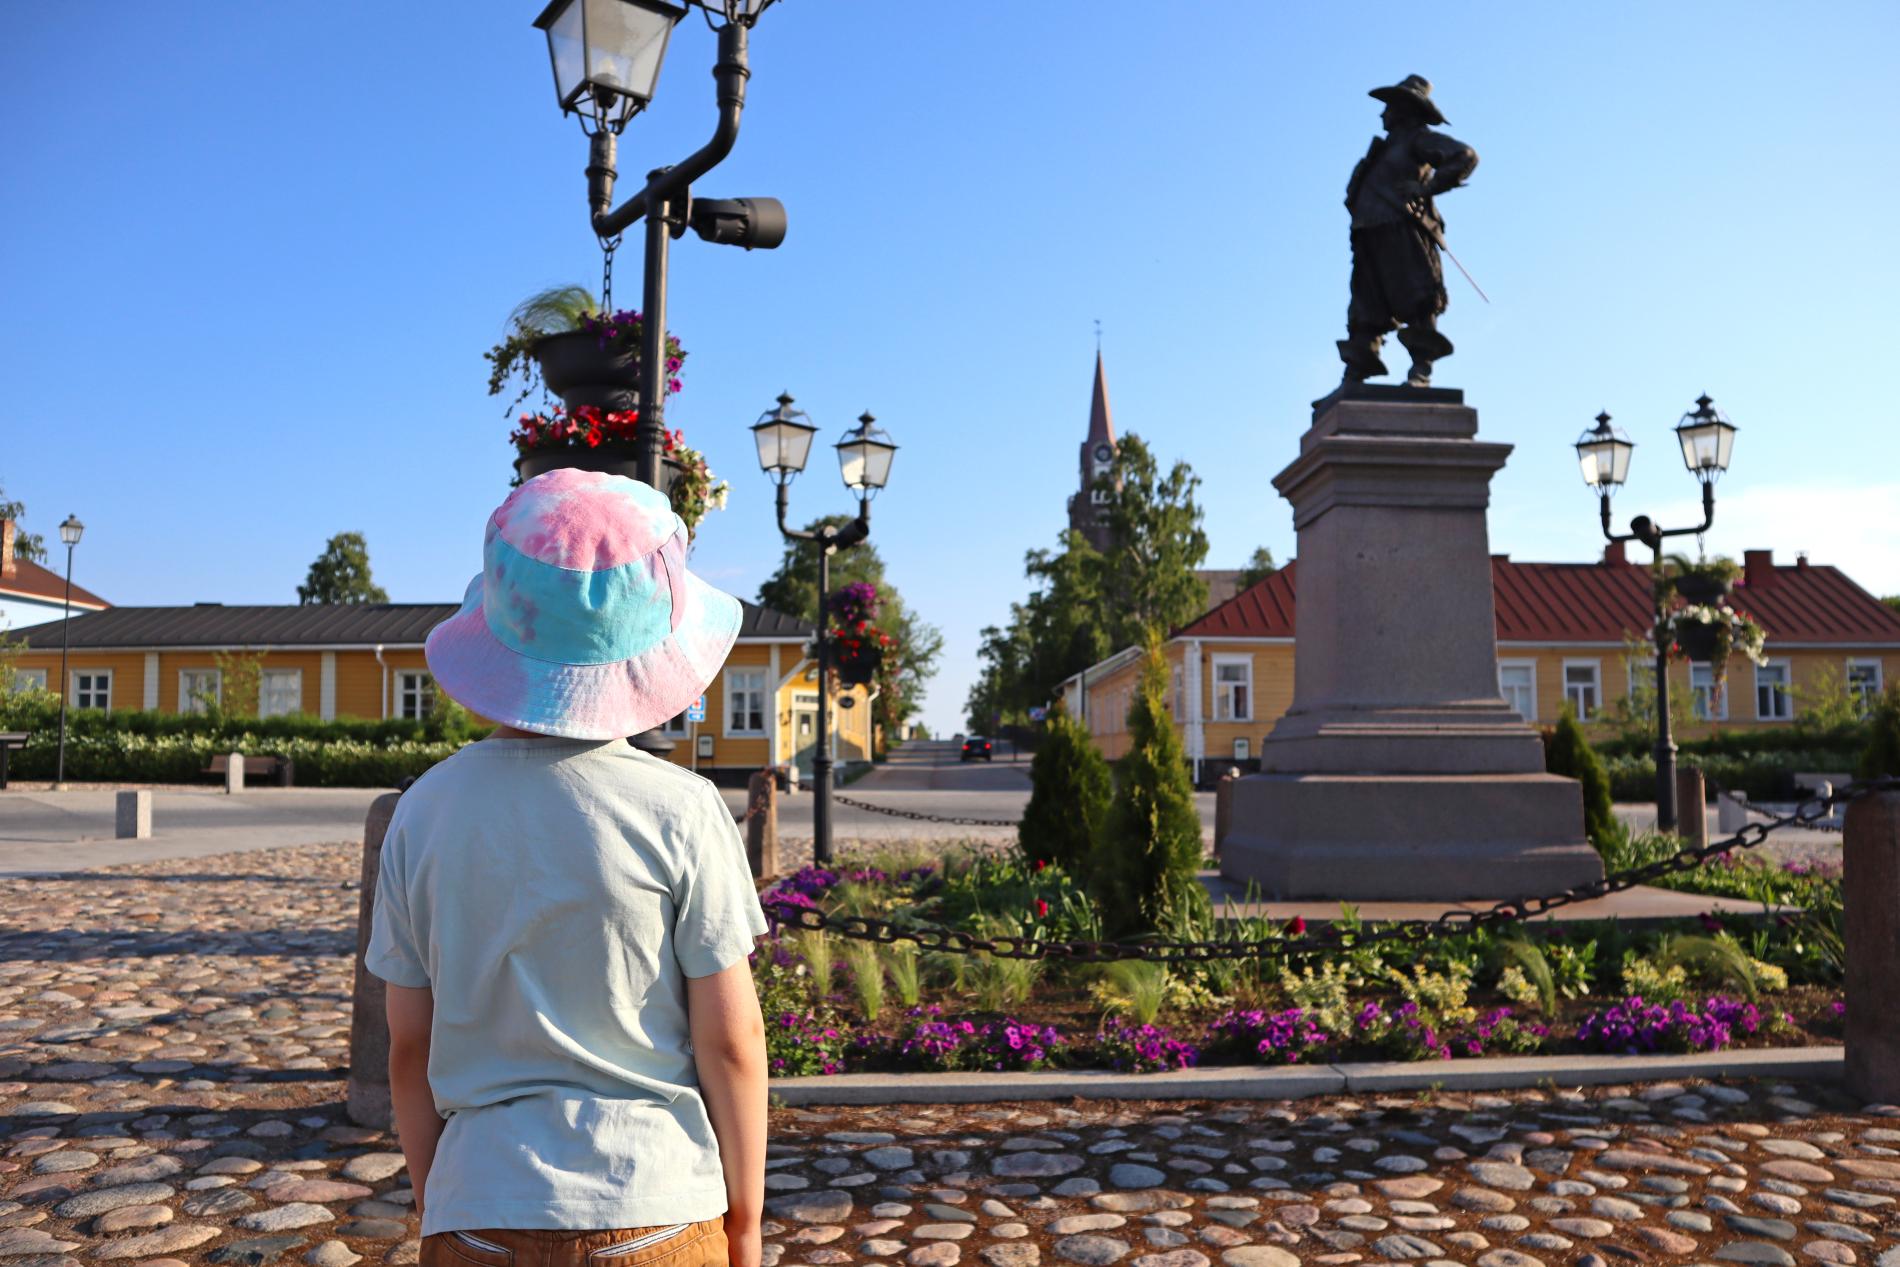 A boy with a hat looks towards the church on a summer day at Pekkatori Square.